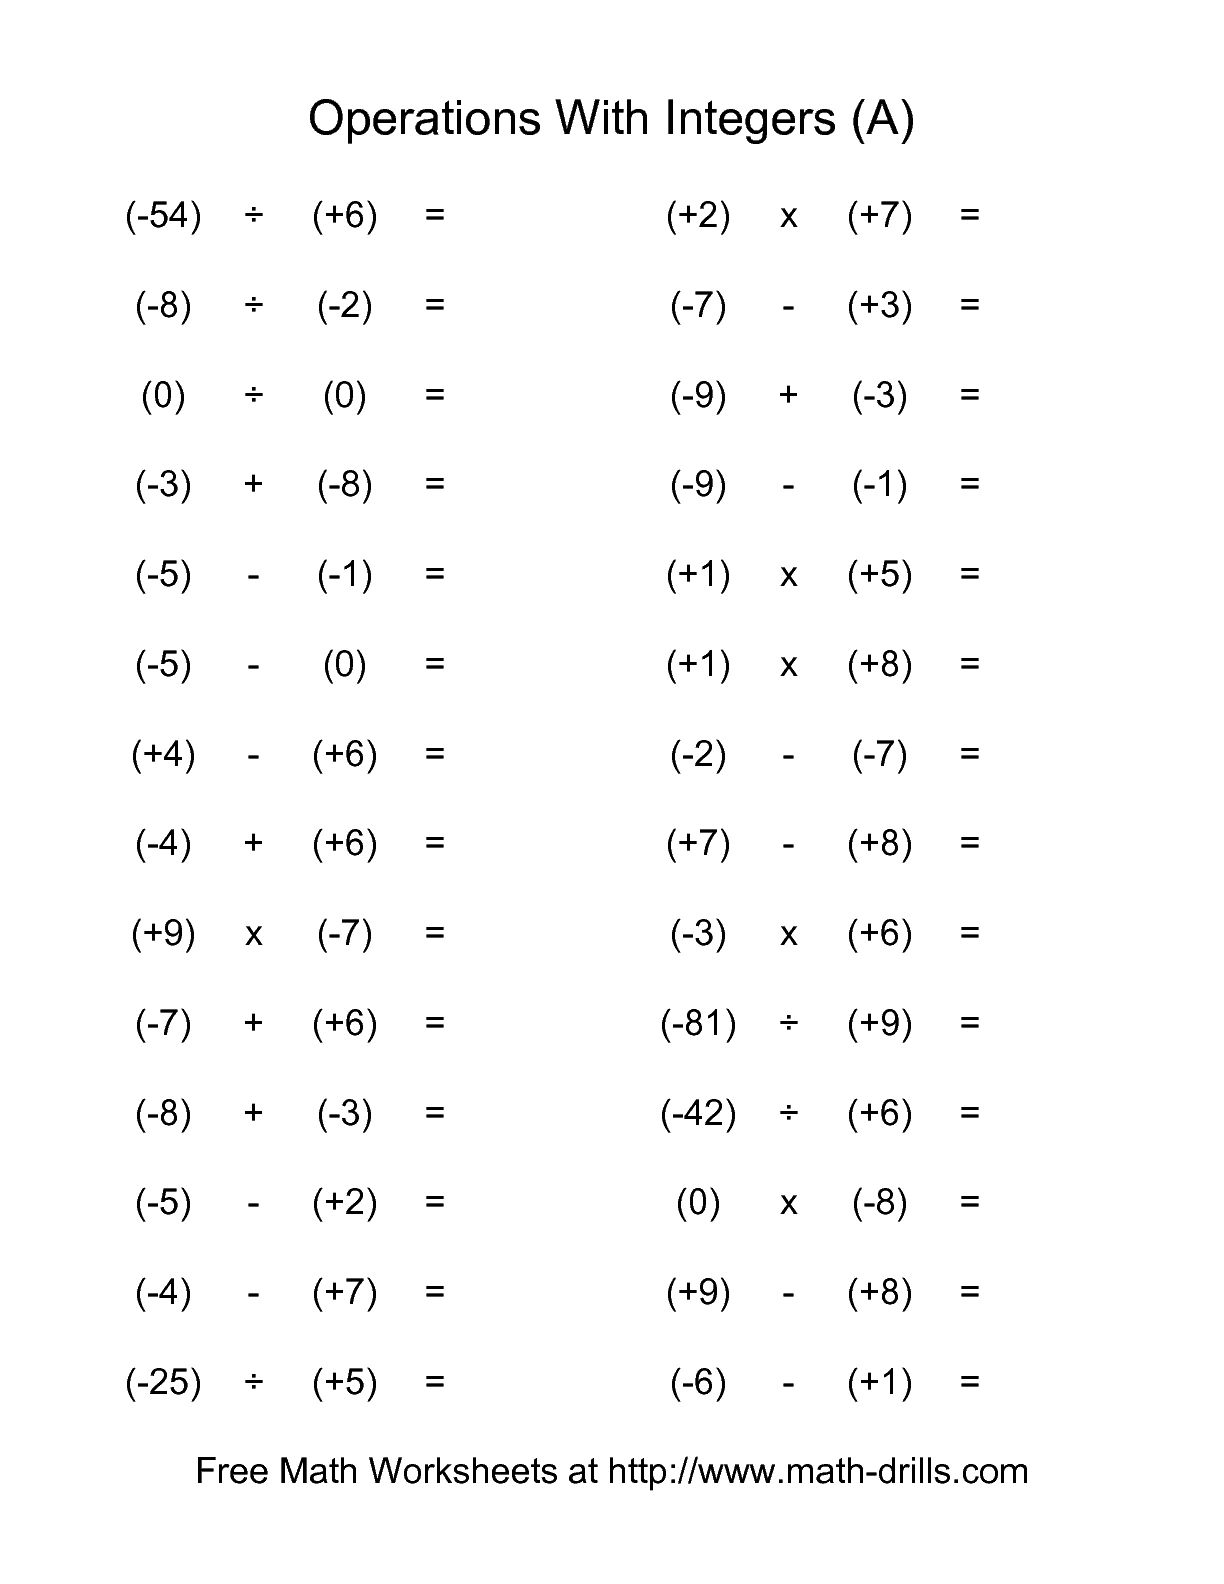 Operations with Integers Worksheet